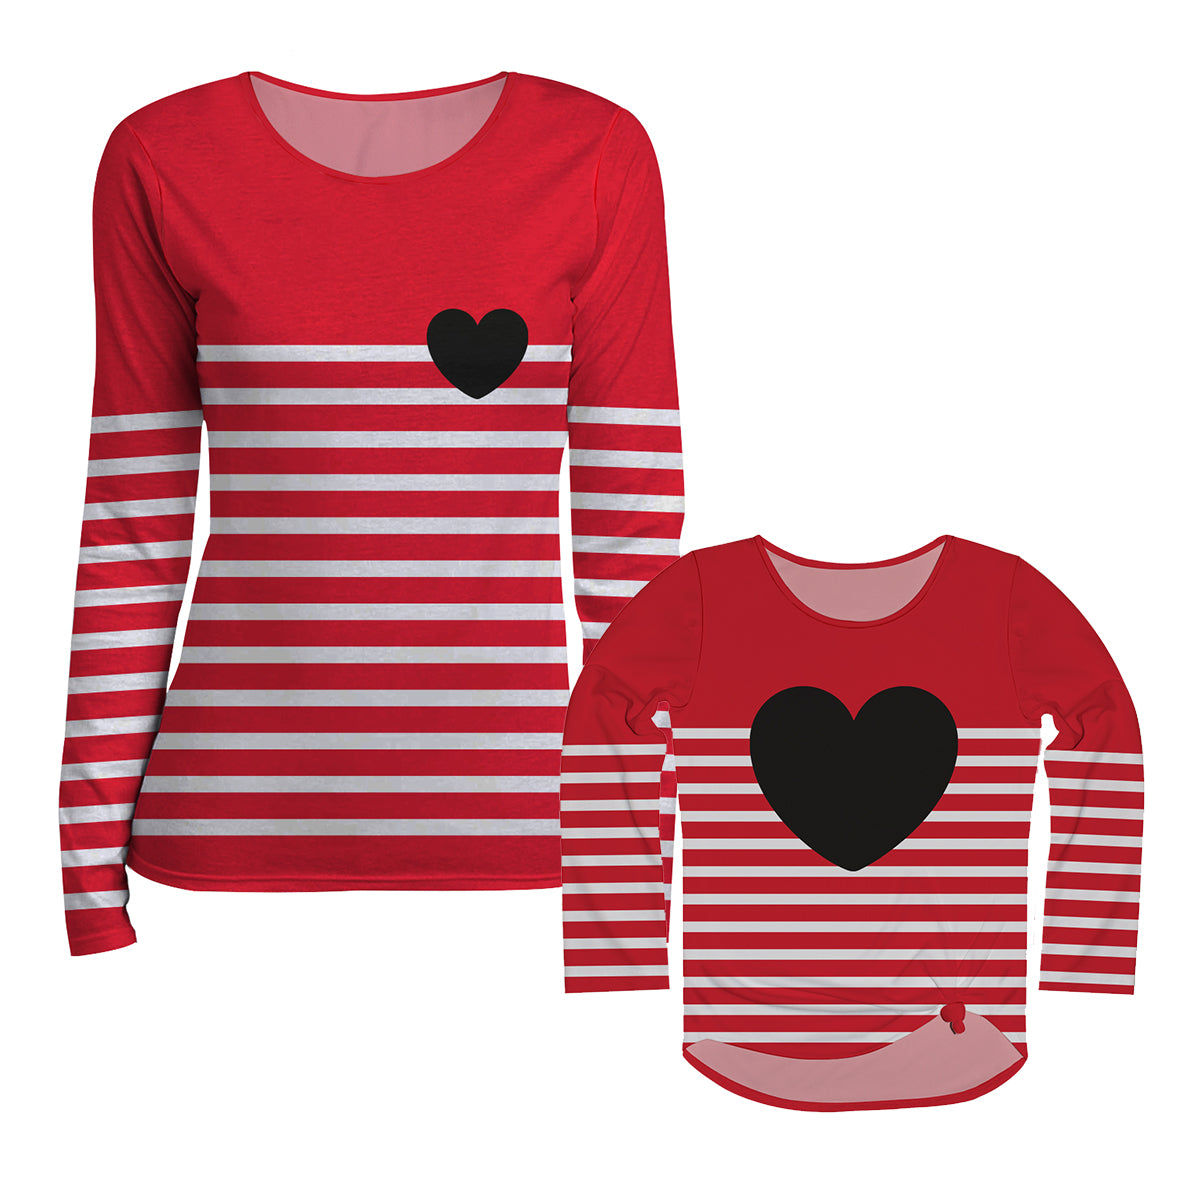 Heart Stripes White and Red Long Sleeve Tee Shirt - Wimziy&Co.